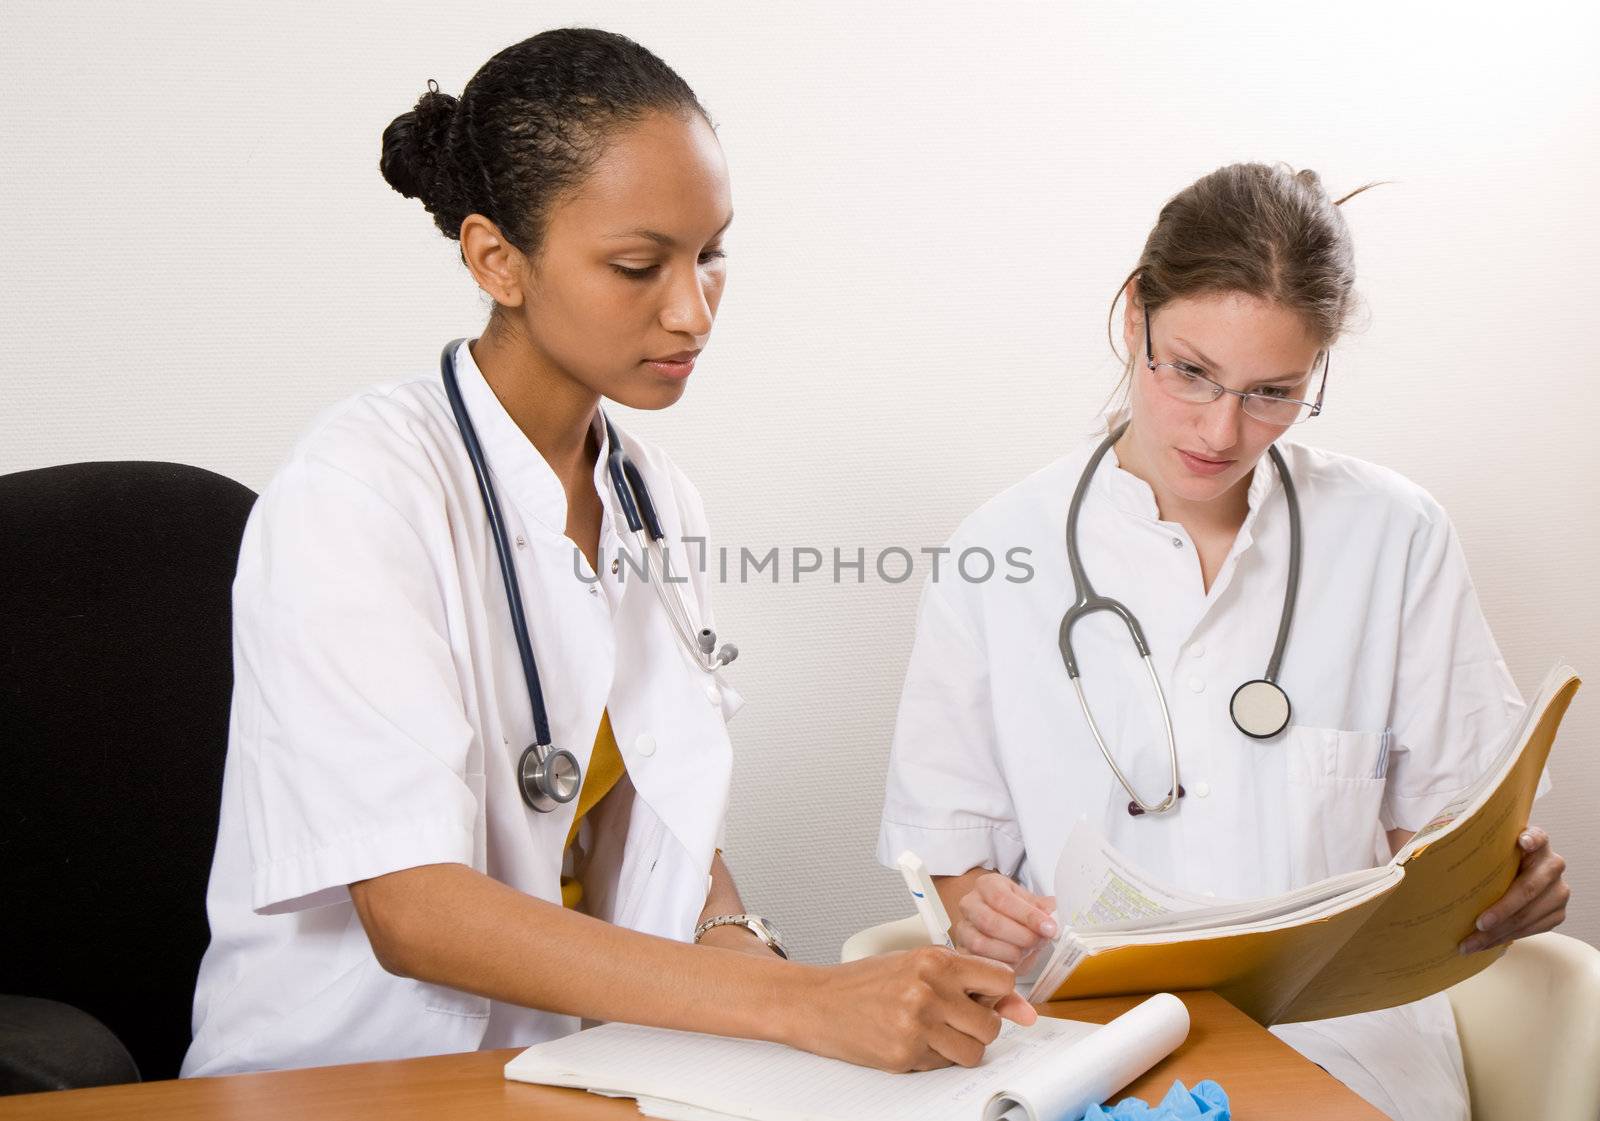 Two young doctors sitting together and discussing a case